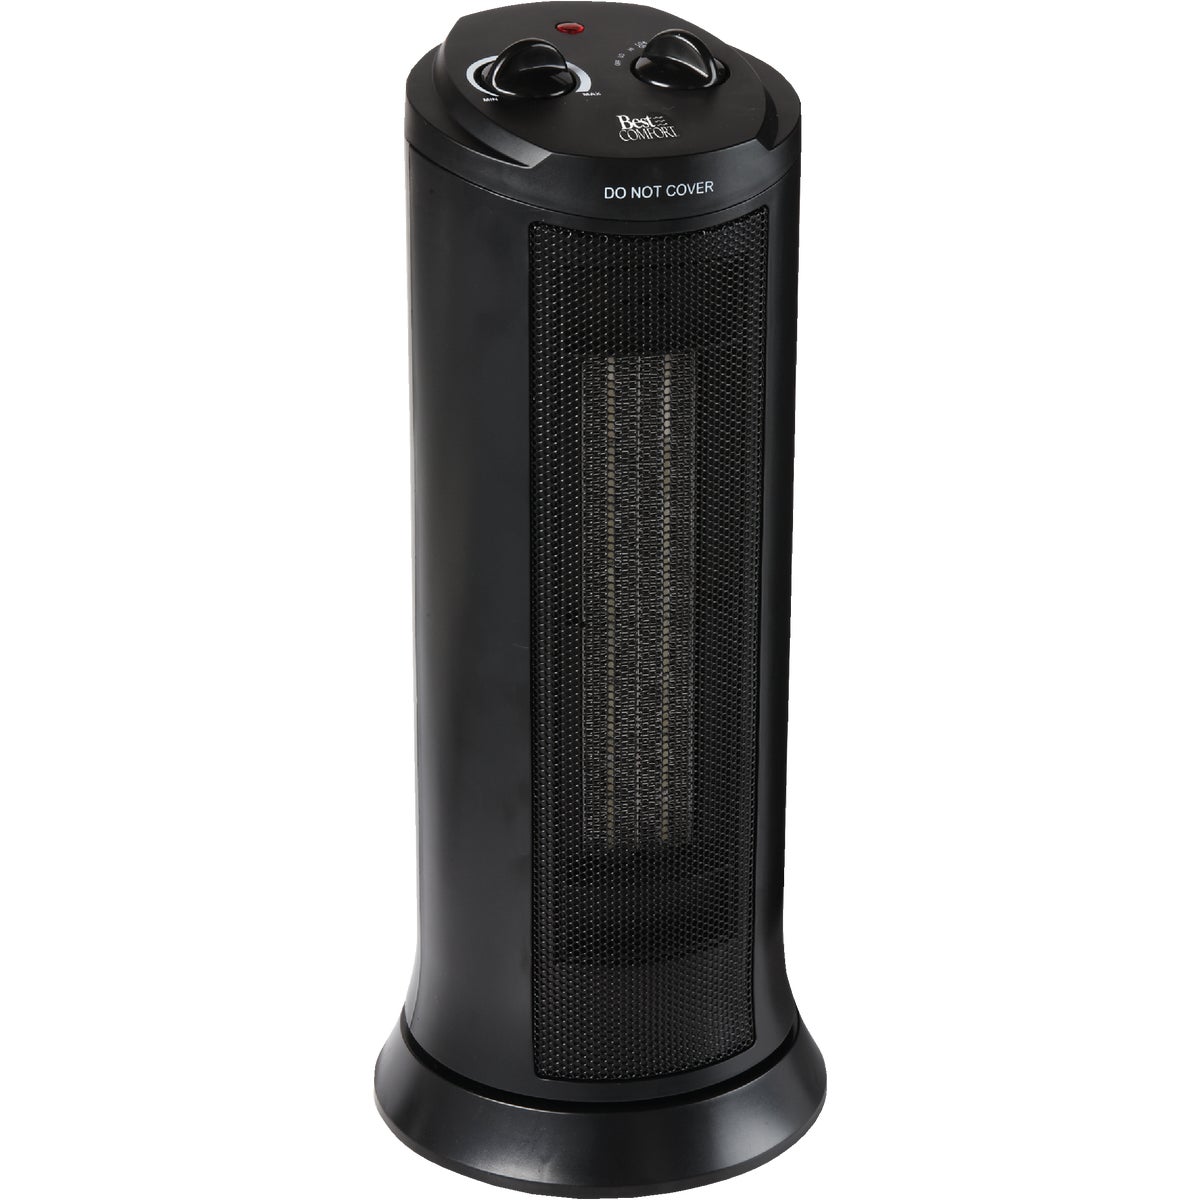 Item 401830, Ceramic heater with adjustable thermostat and two heat settings.